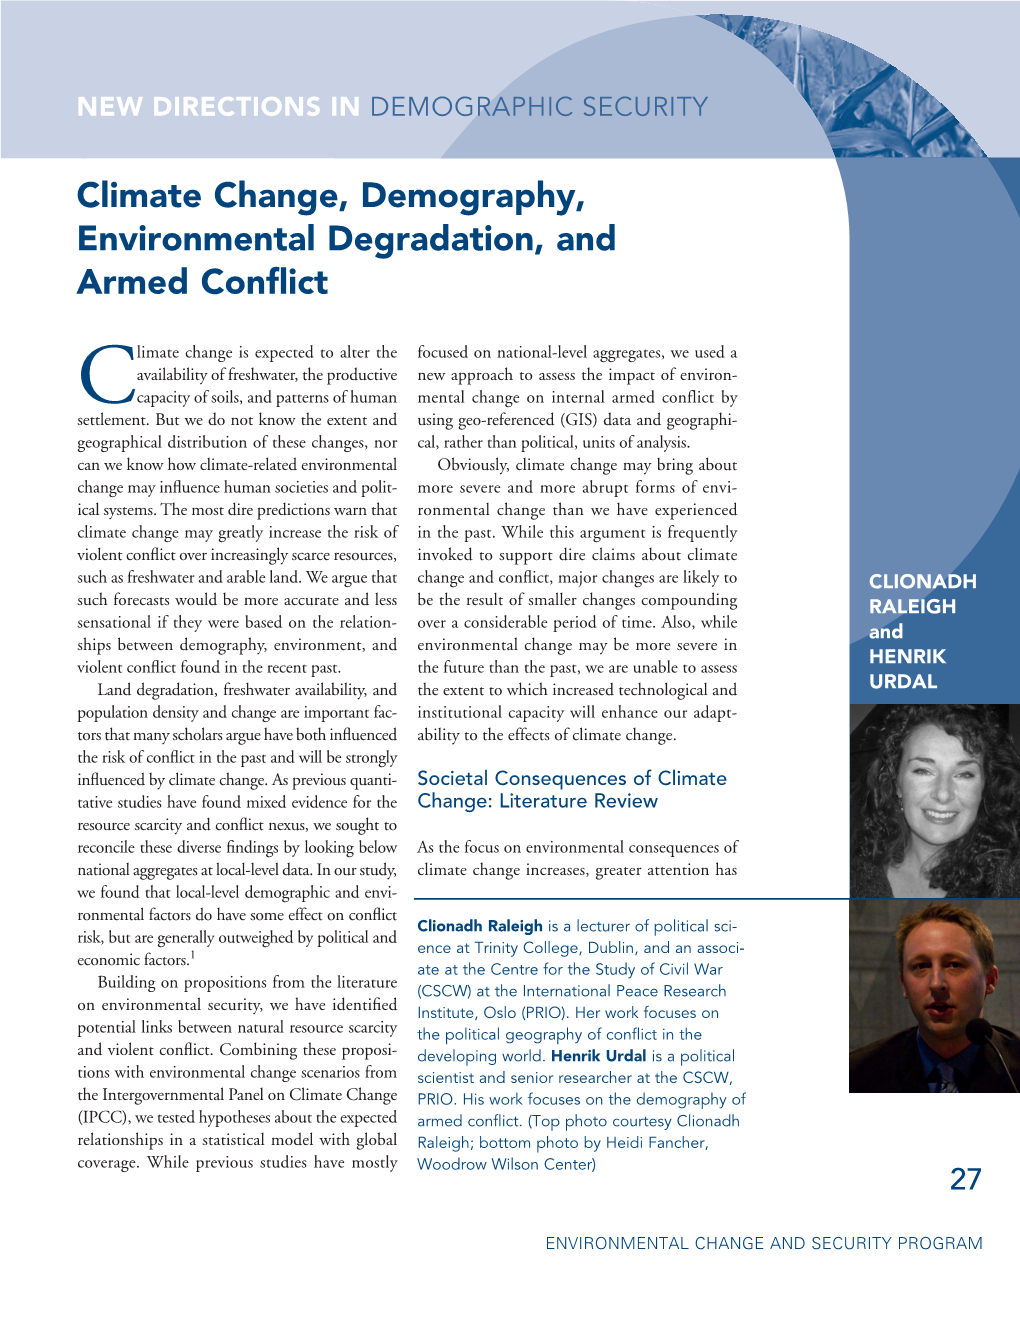 Climate Change, Demography, Environmental Degradation, and Armed Conflict